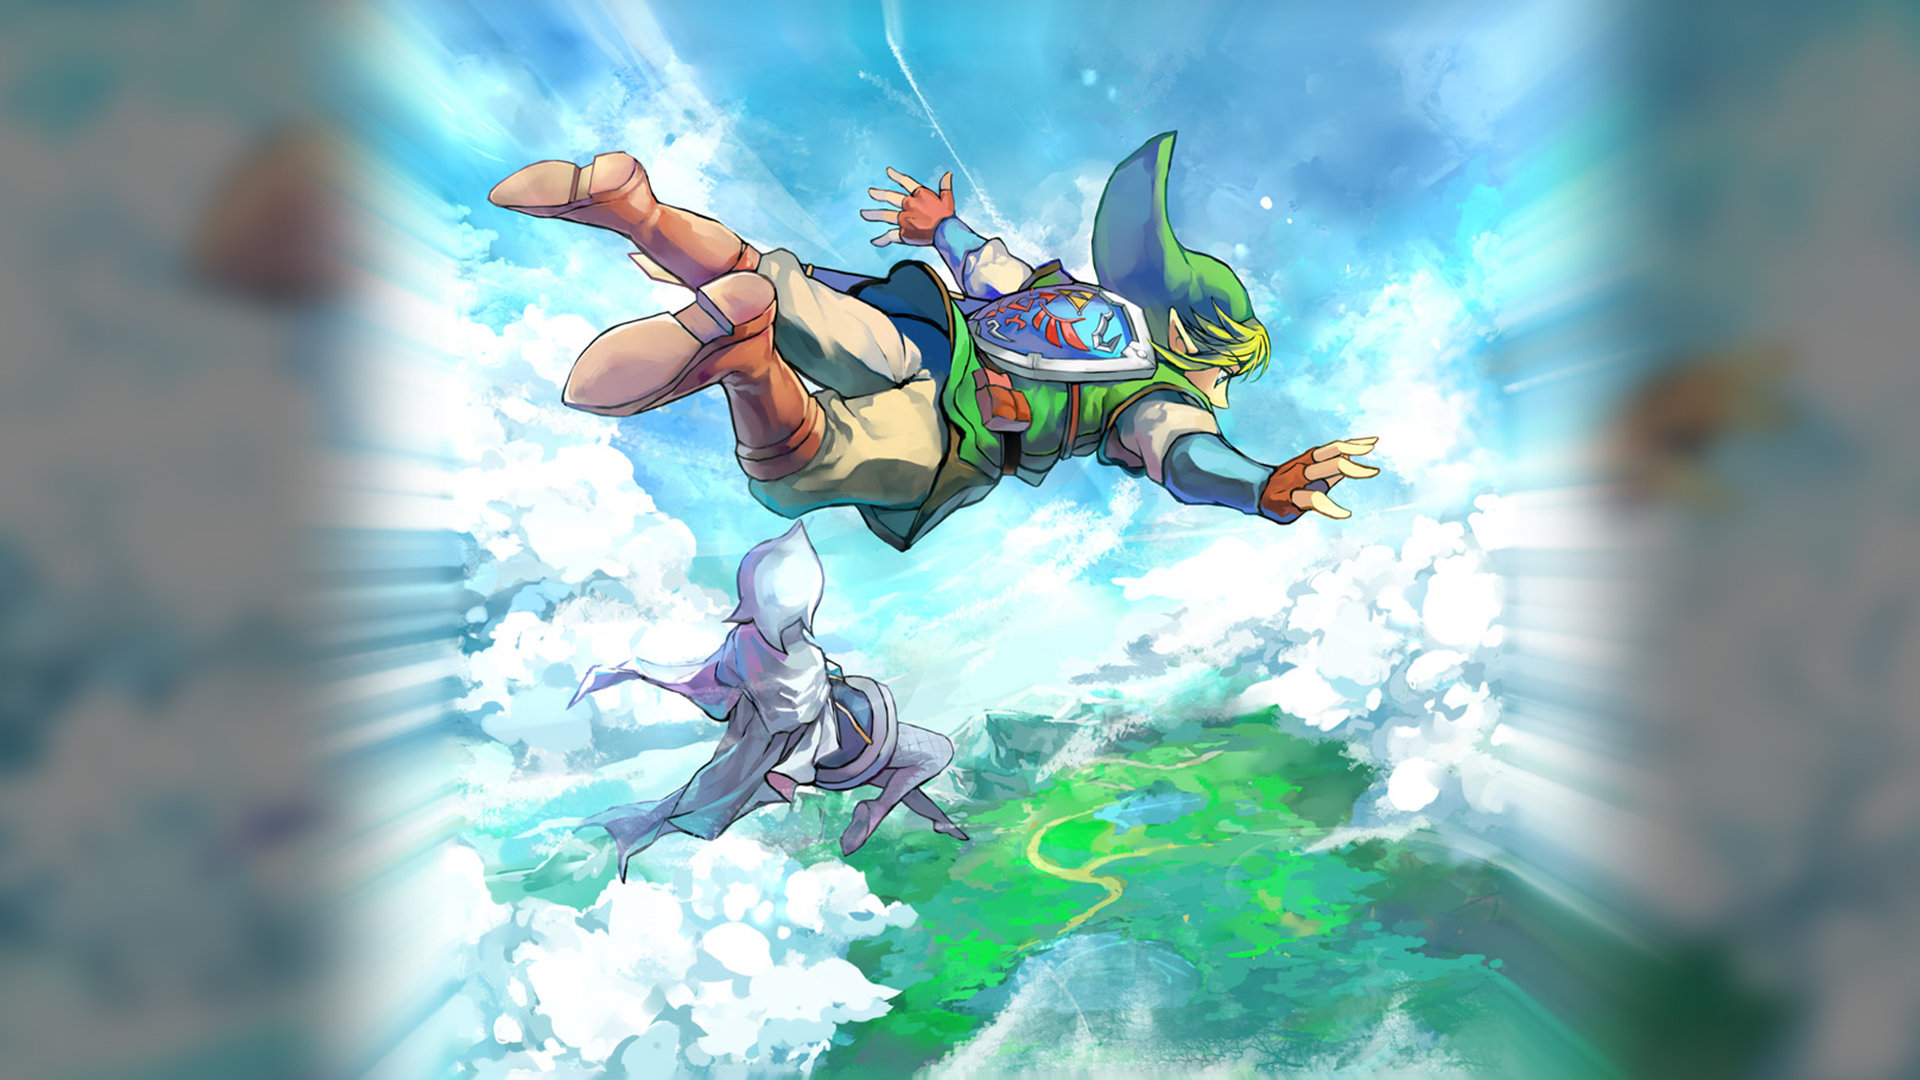 High resolution The Legend Of Zelda: Skyward Sword full hd 1080p background ID:442240 for PC